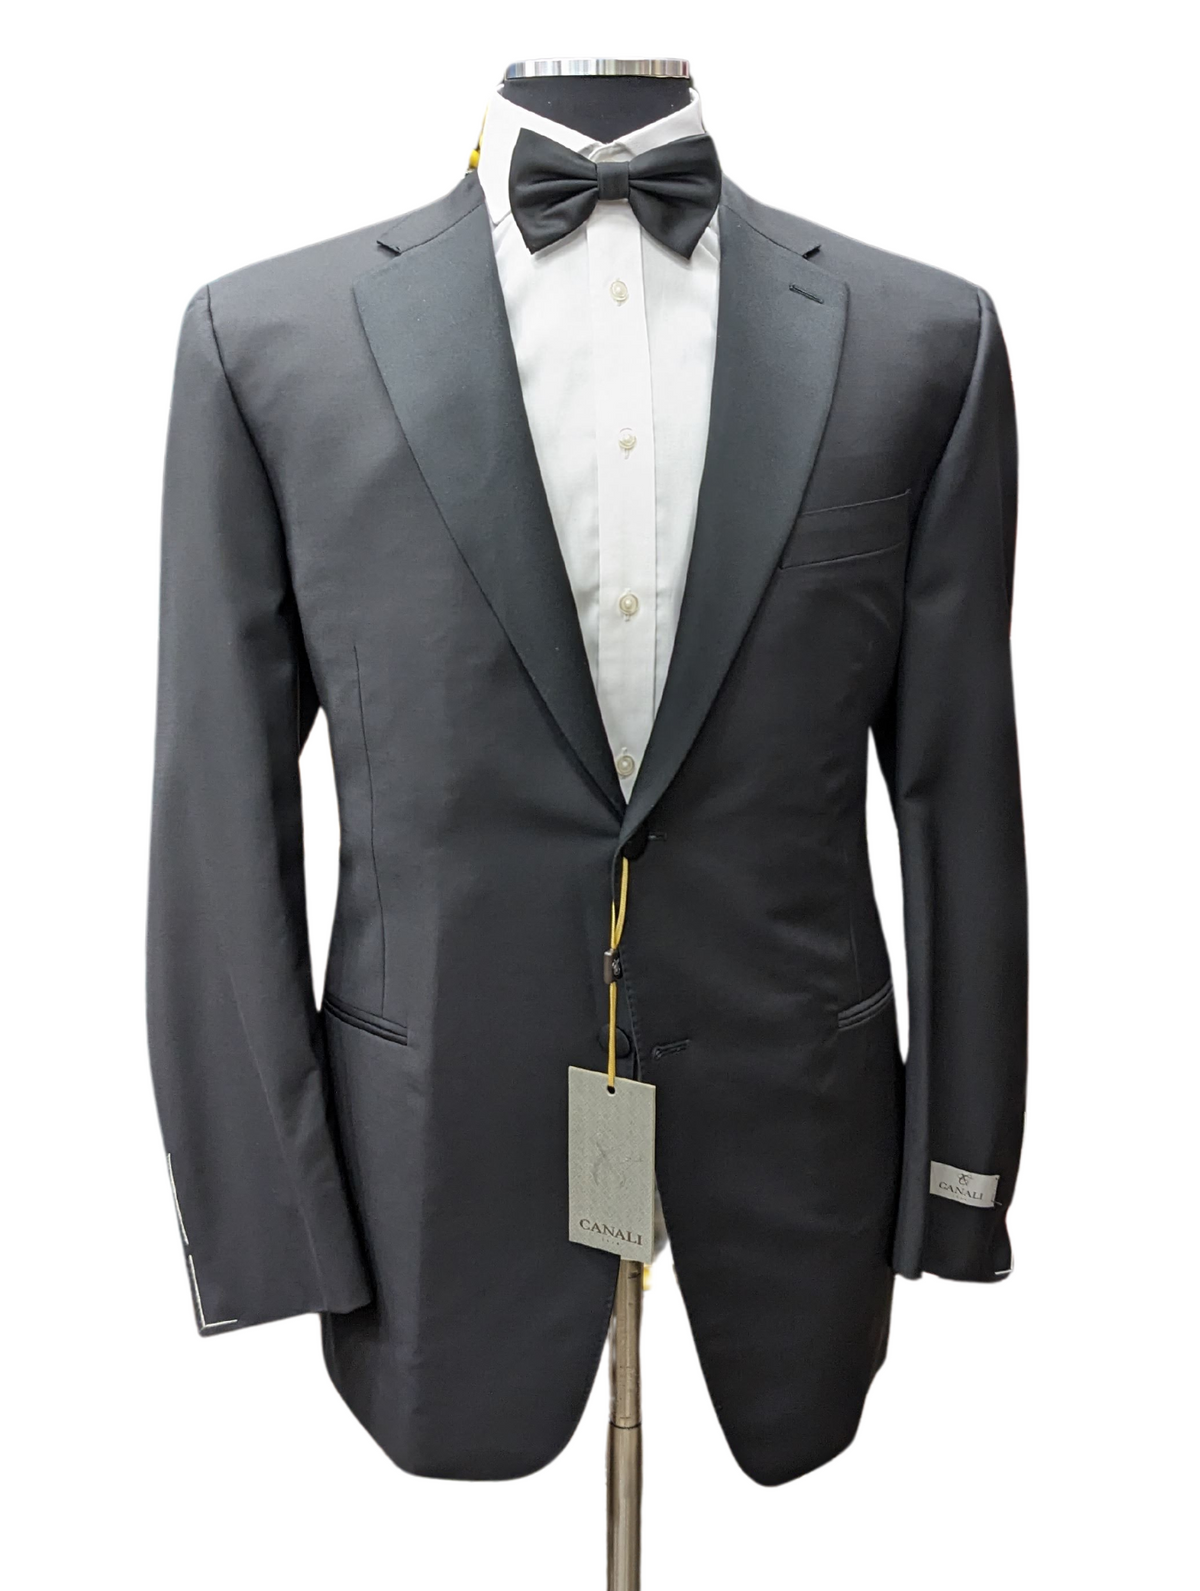 Canali 1934 Mens Solid Black 44R Drop 7 Wool 2 Piece Tuxedo Suit With Satin Lapels